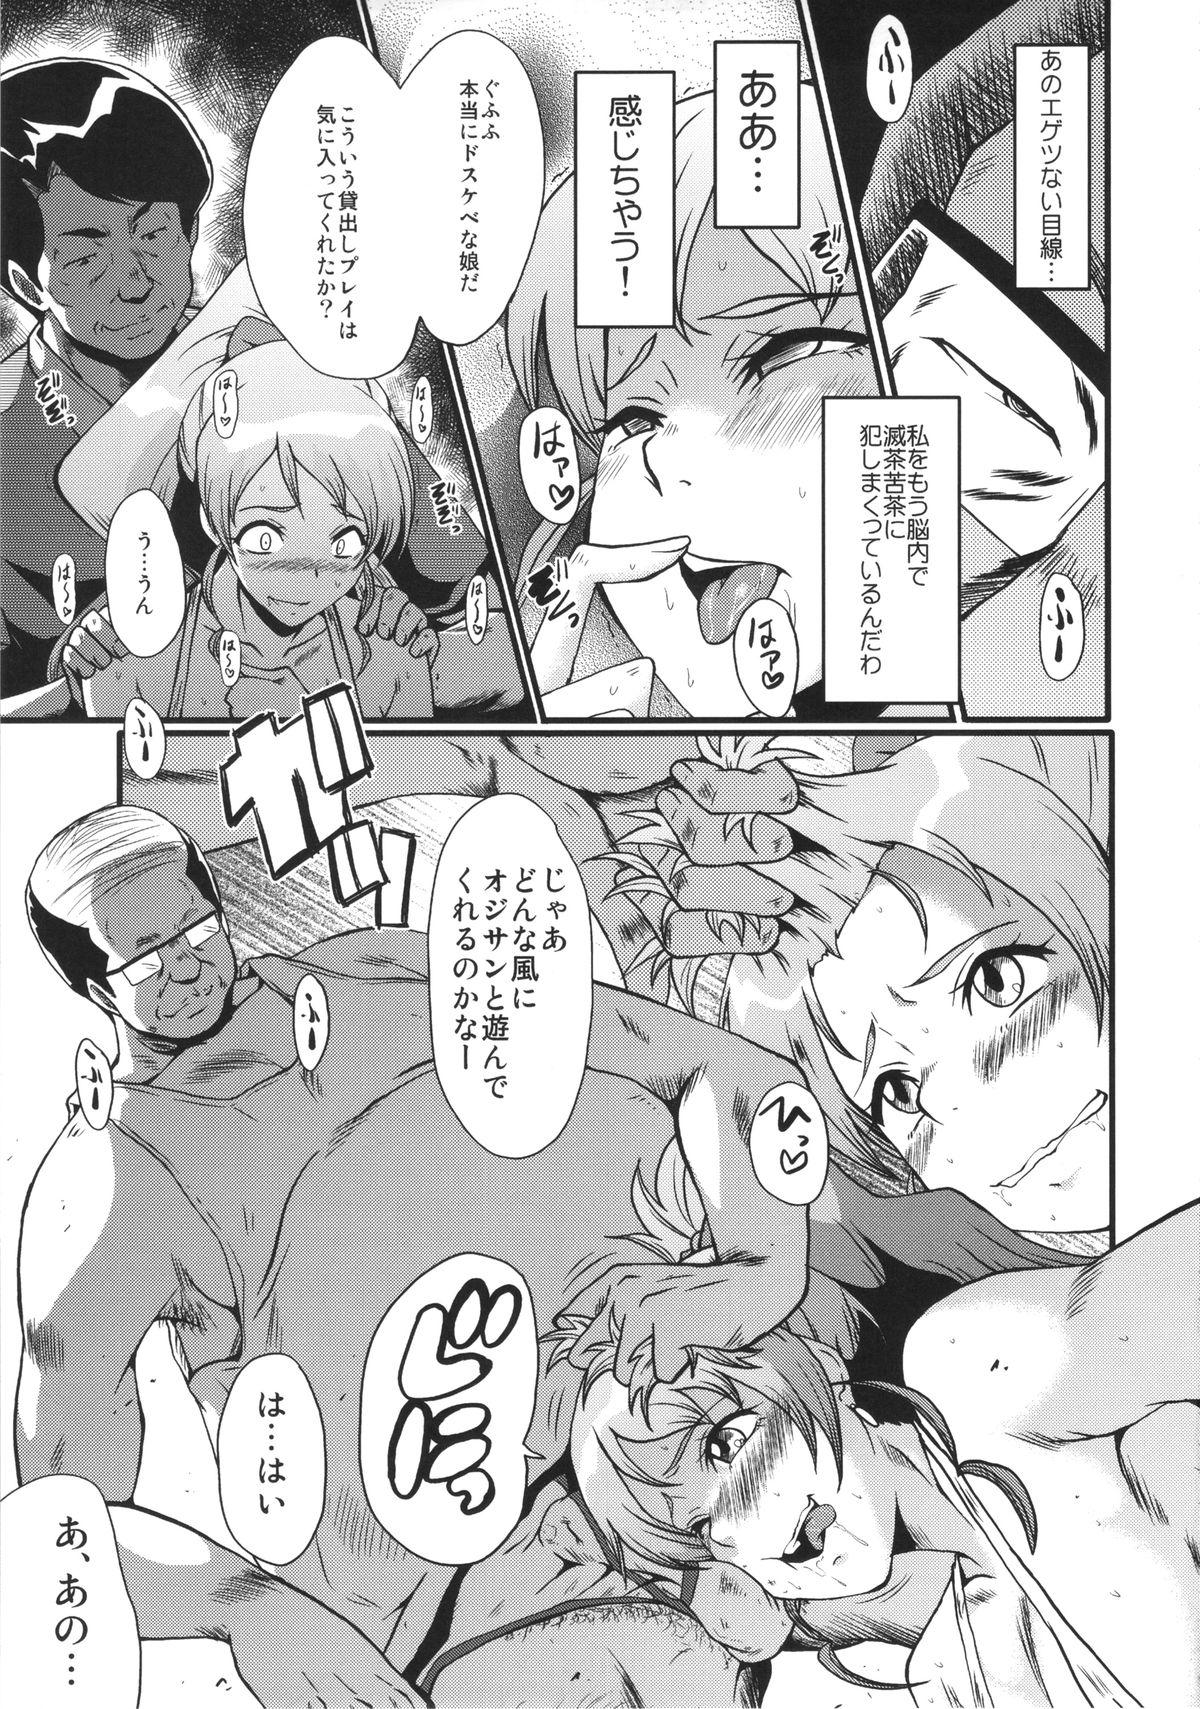 Hard Core Porn Urabambi Vol. 50 - Happinesscharge precure Gay Military - Page 8